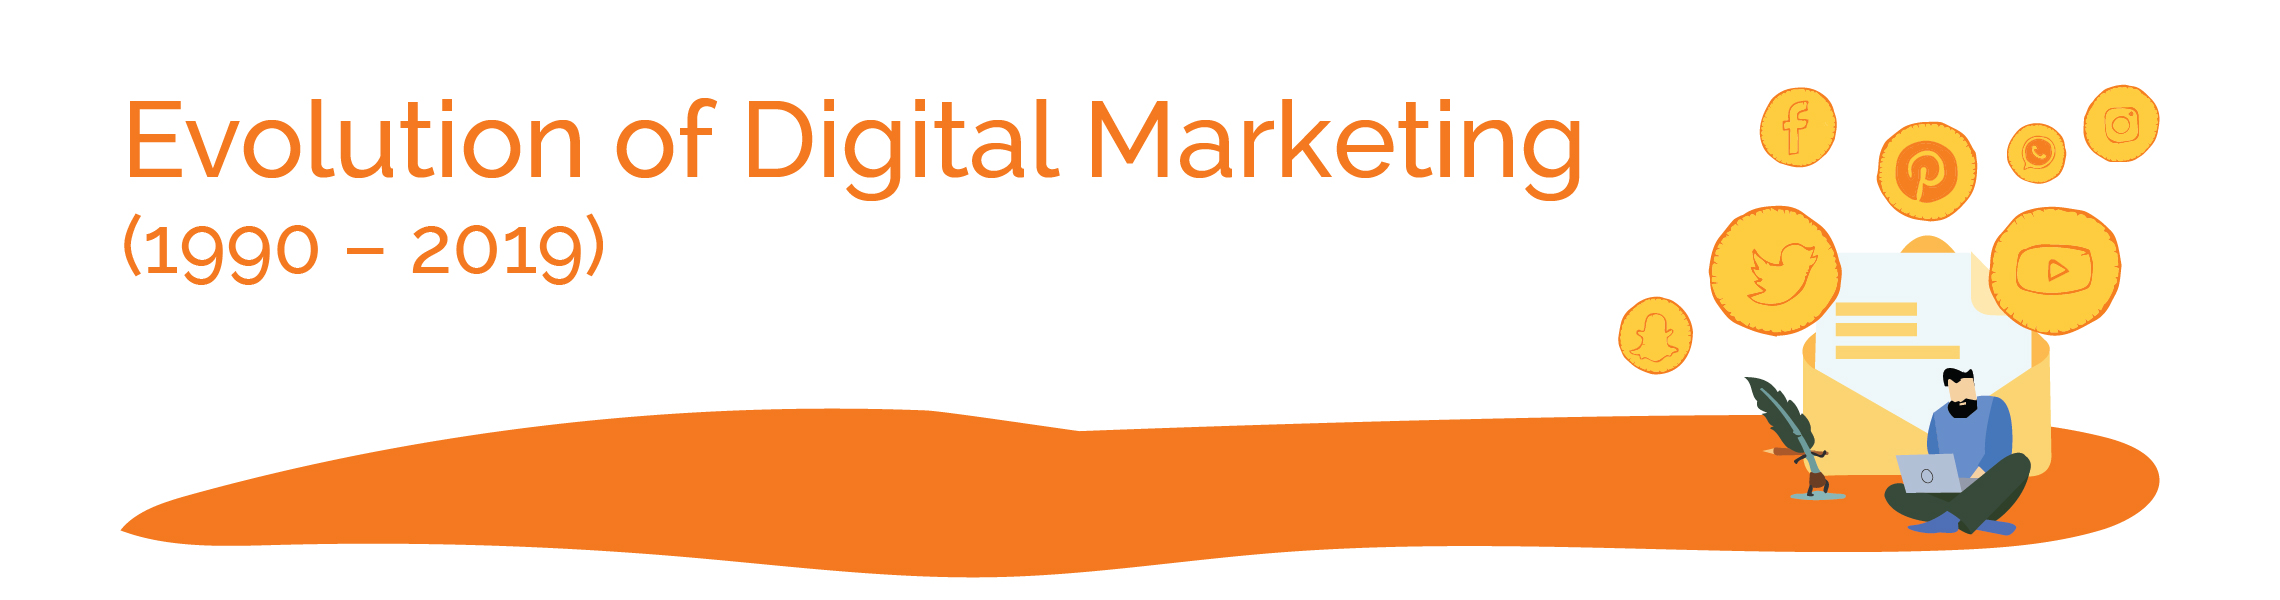 How Digital Marketing Evolved Over the Years